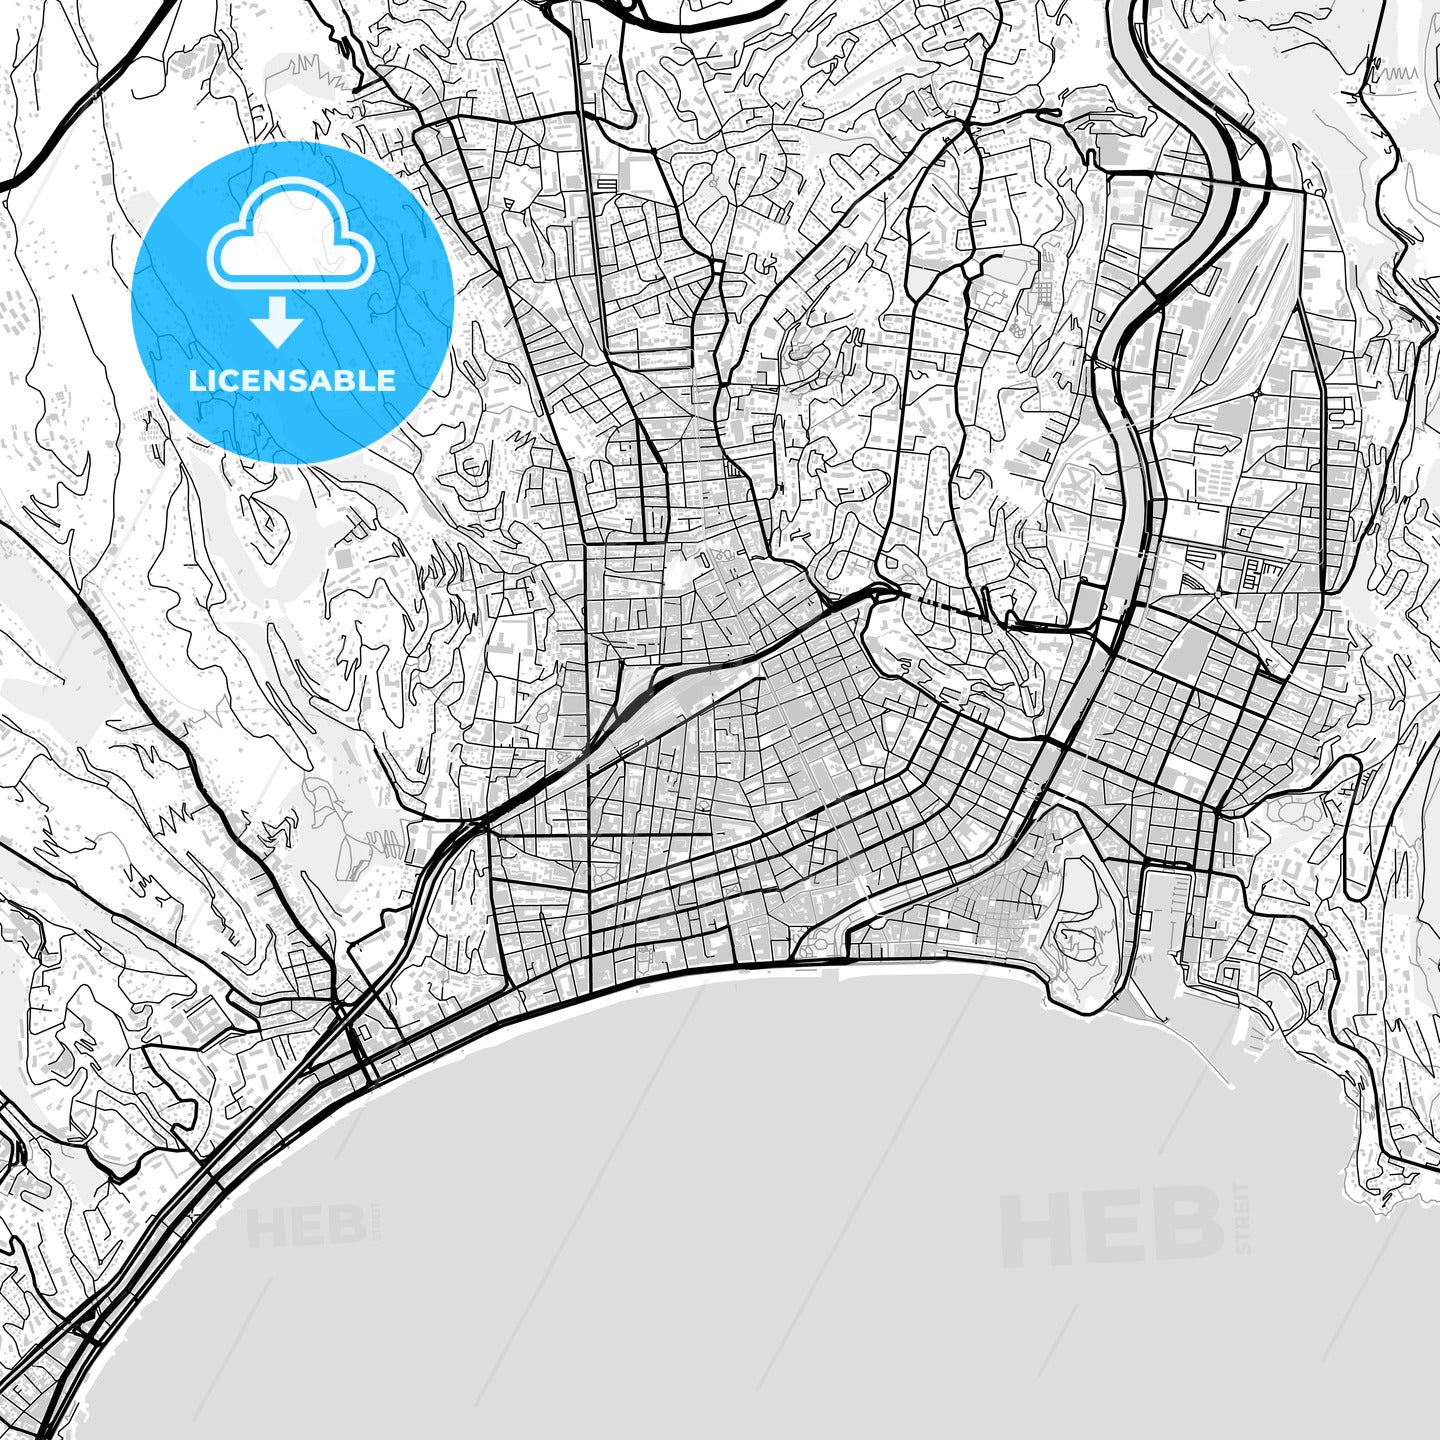 Downtown map of Nice, light